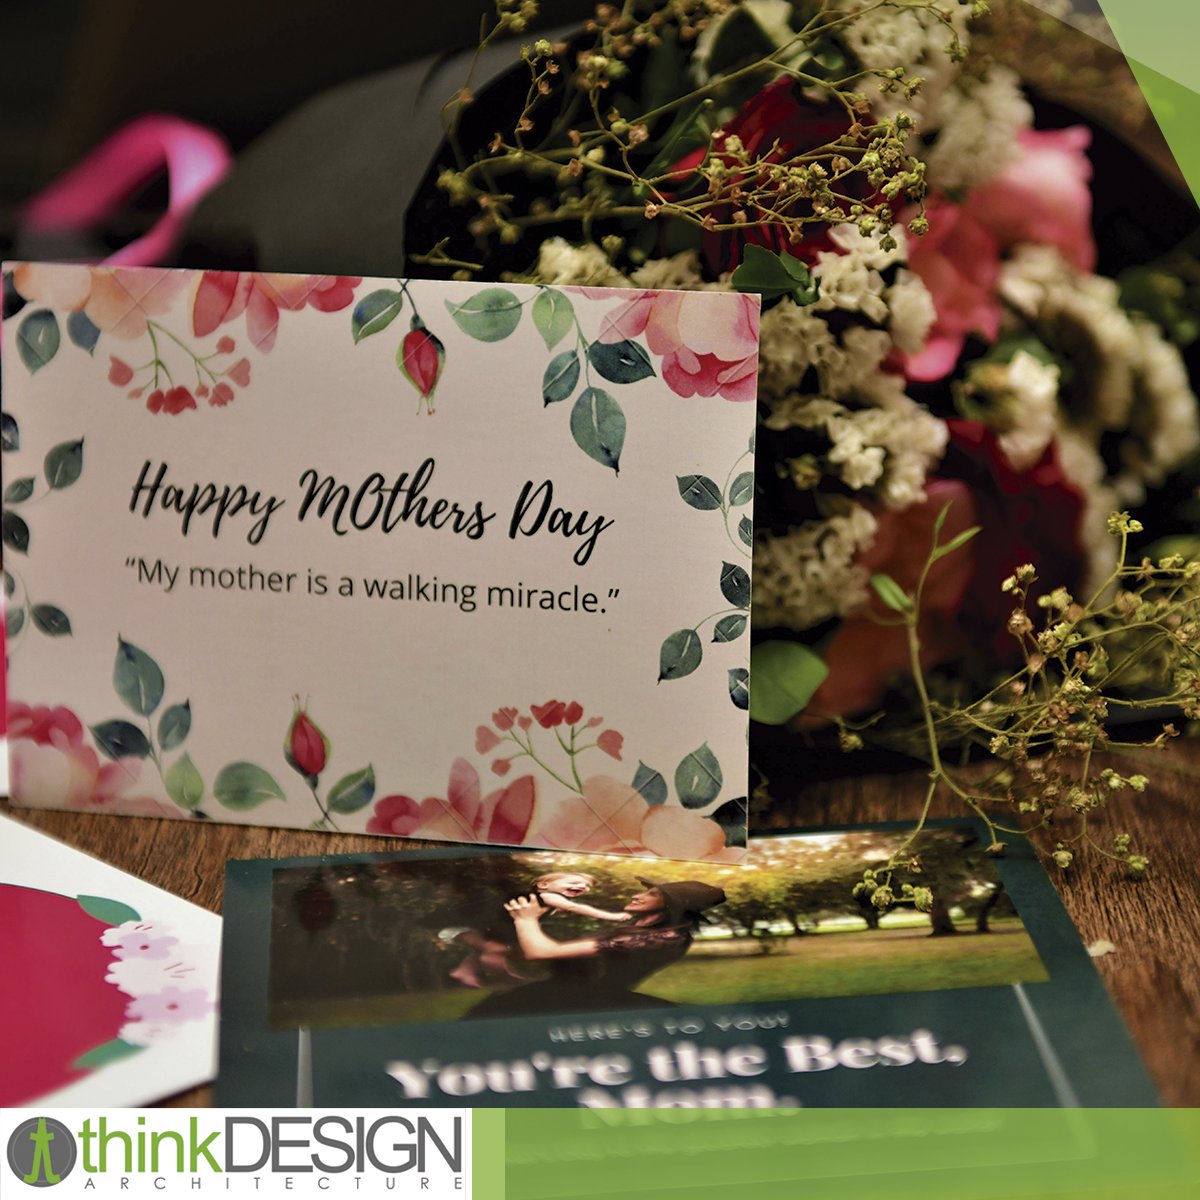 Happy Mother's Day! 🥳🌸🌼🌺

'Mama was my greatest teacher, a teacher of compassion, love and fearlessness. If love is sweet as a flower, then my mother is that sweet flower of love.' – Stevie Wonder

#ThinkDesignArchitecture #thinkbig #thinkdesign #Architecture #CustomHome